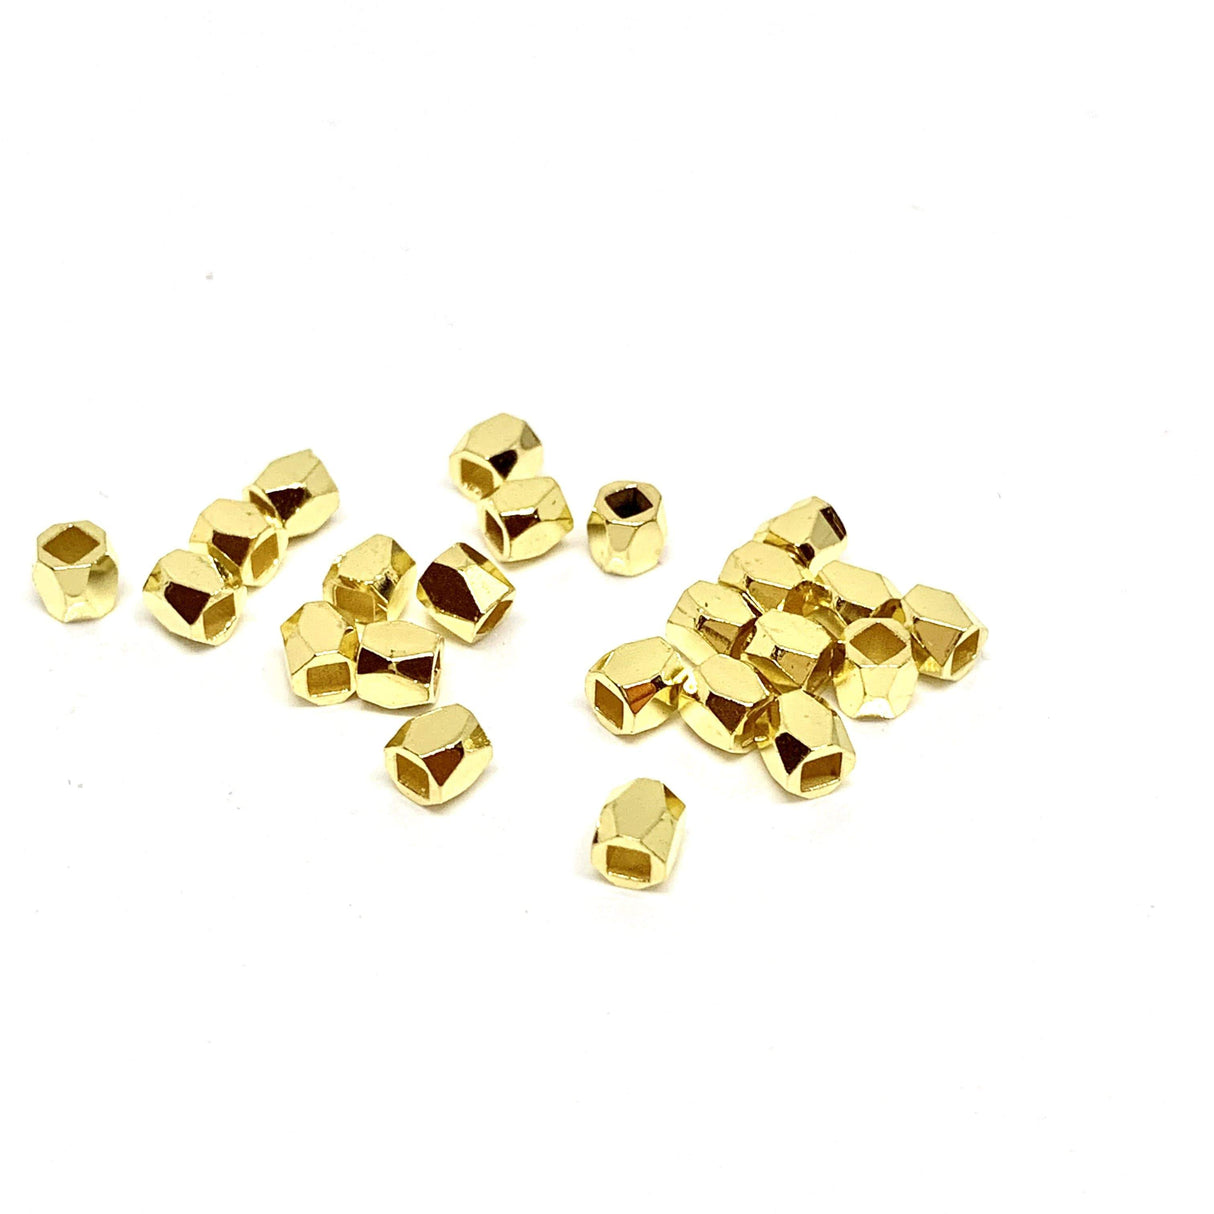 Metal Beads, Faceted, 3x3mm, 20 pcs